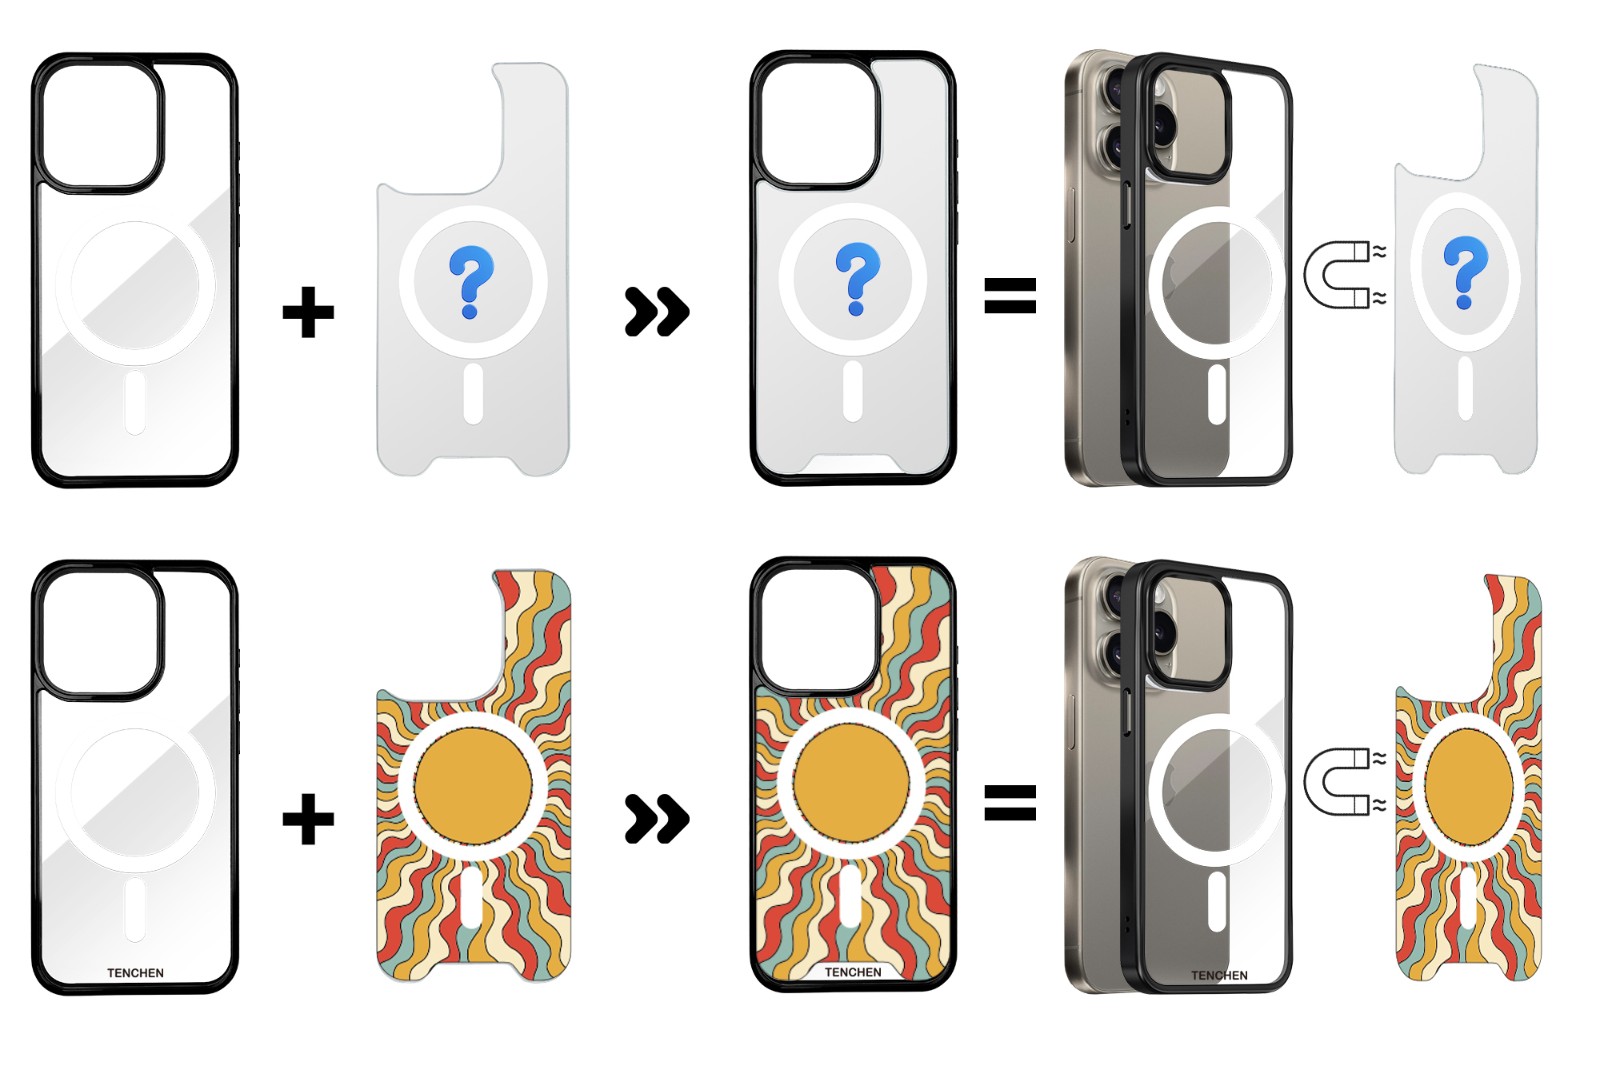 news-TENCHEN Latest Design Phone Case: Magnetic Phone Case with Customizable Interchangeable PC Shee